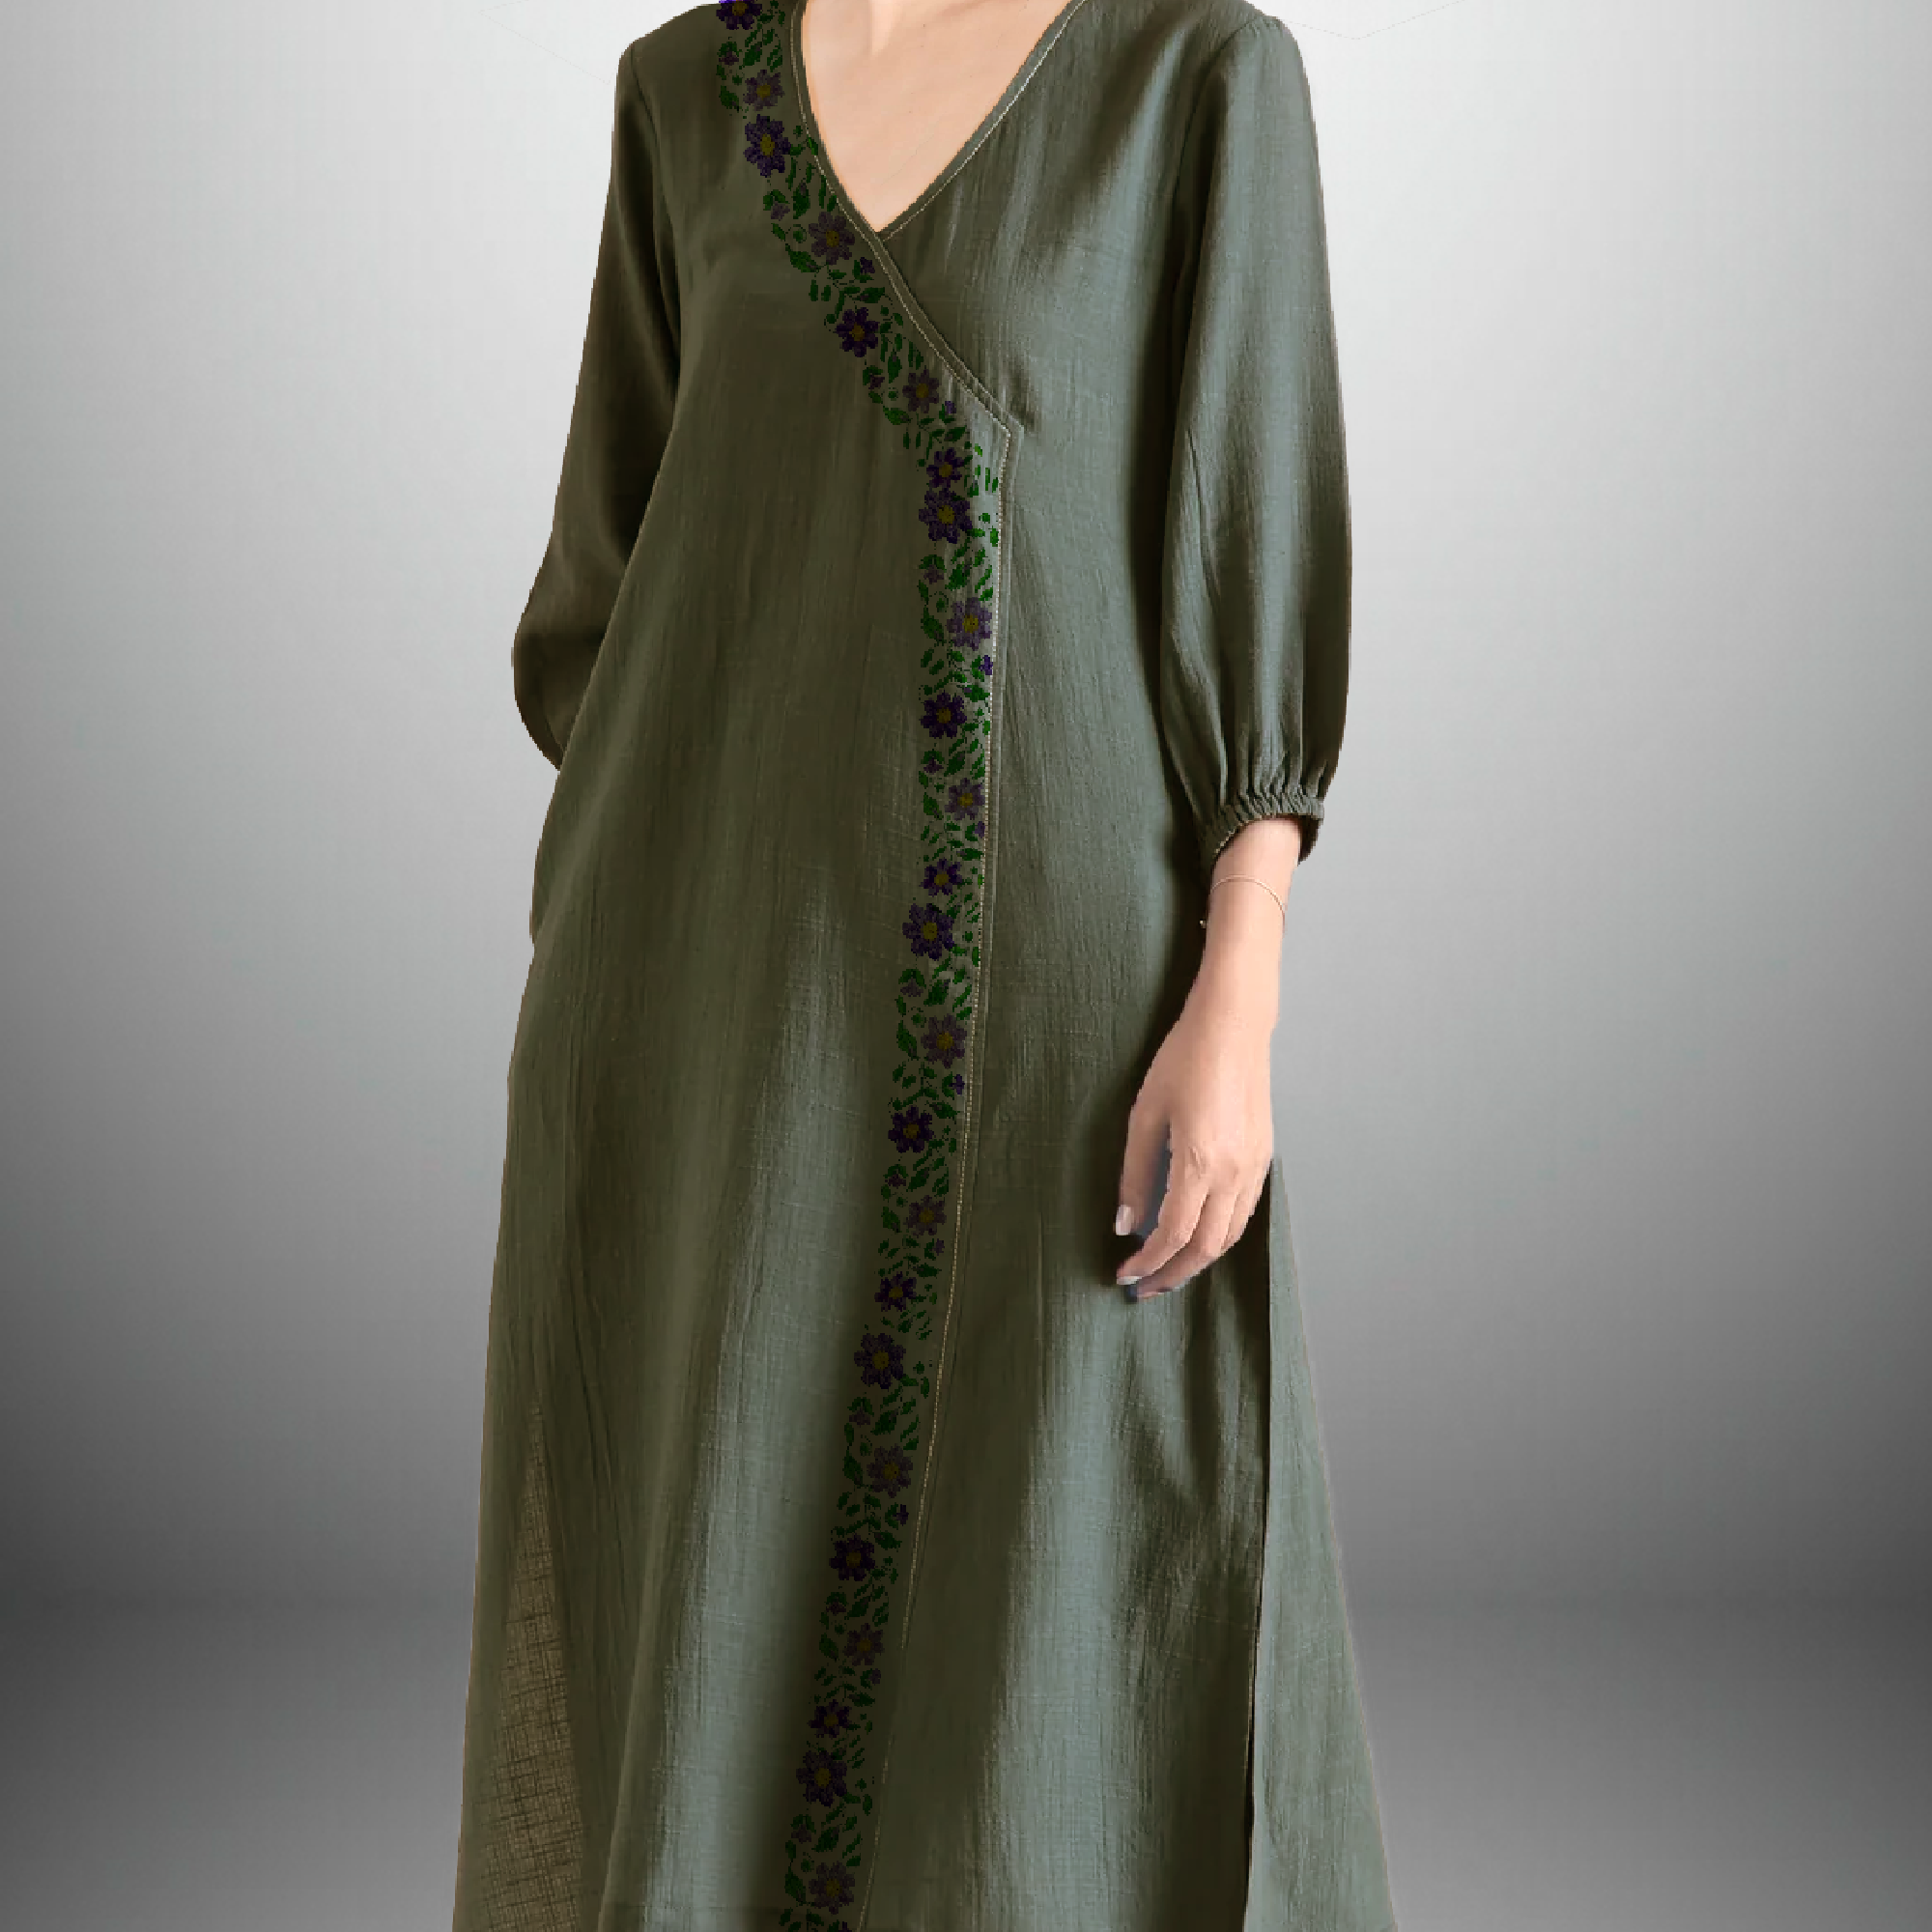 Women's Rayon Pine Green color overlapped Kurti and Black pant with floral embroidery-RWKS004